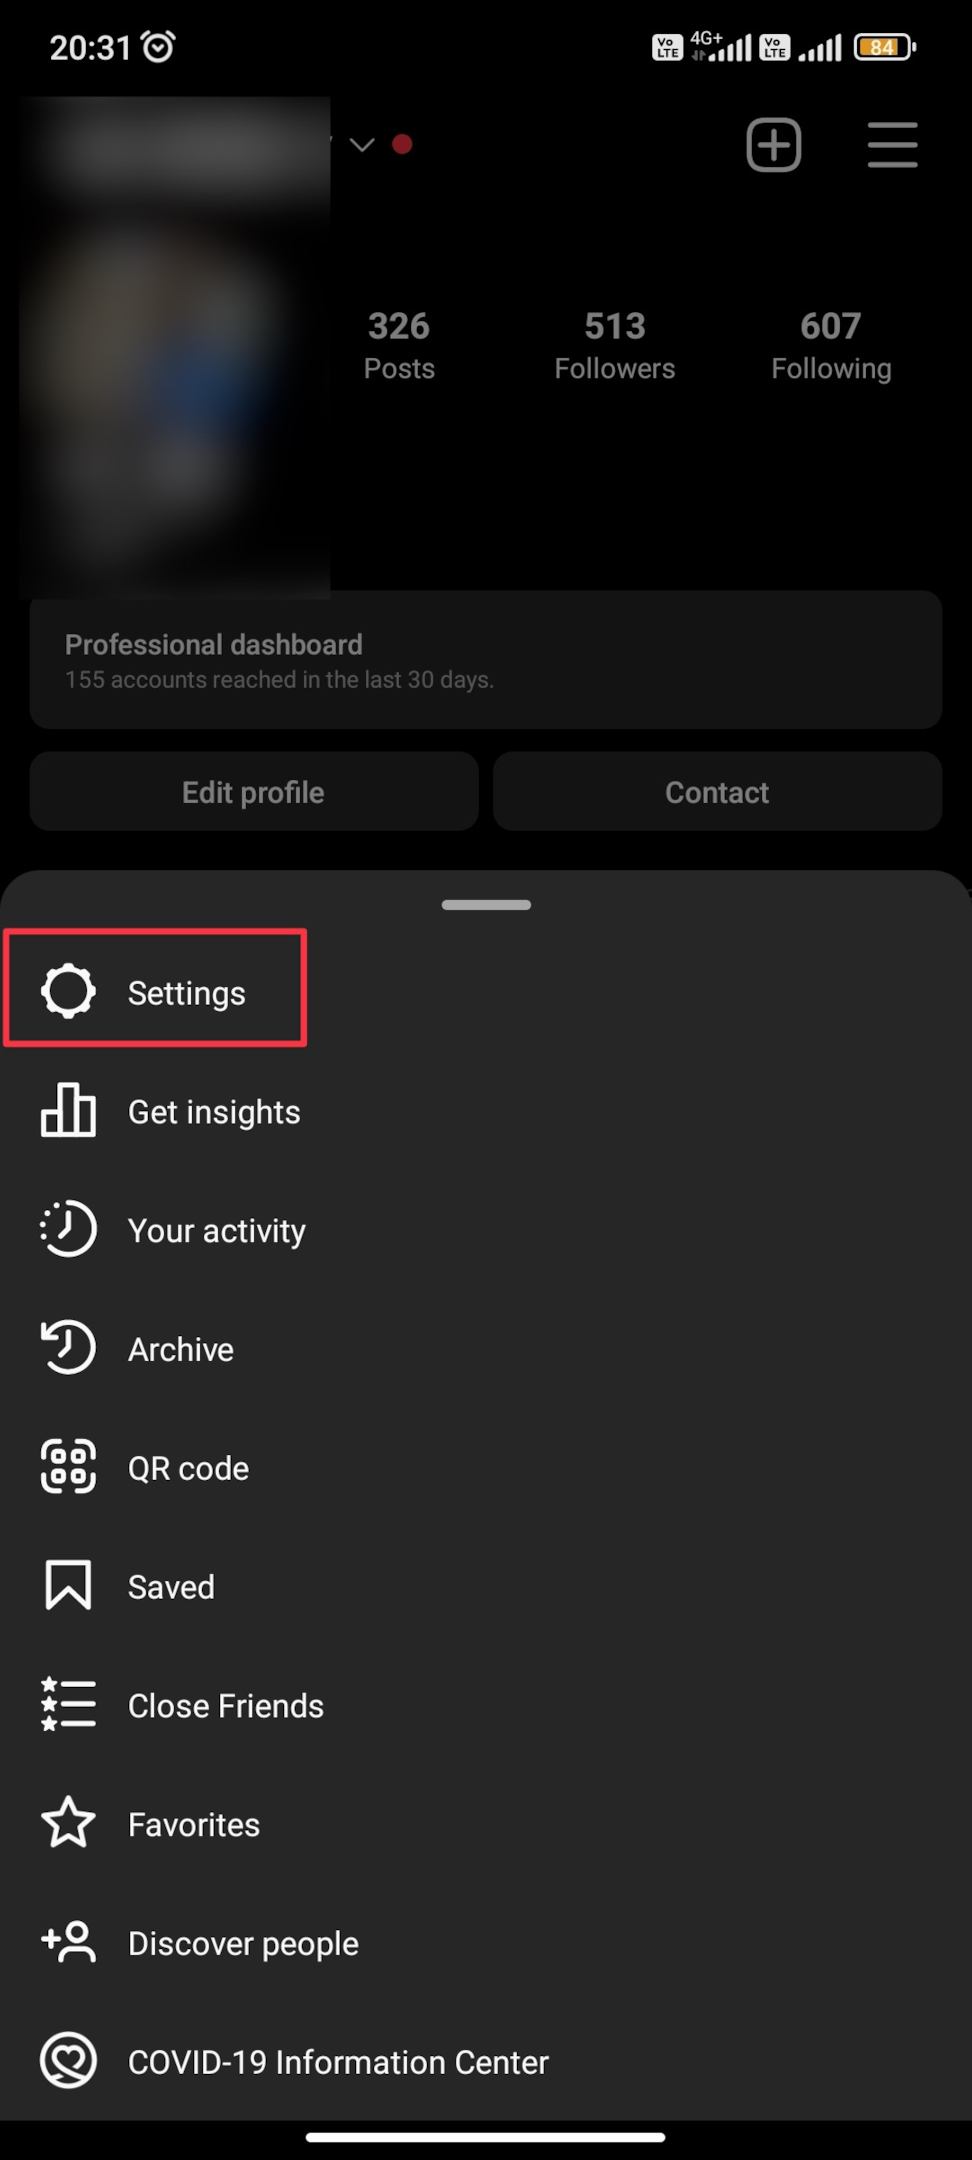 Remote.tools show to tap settings to revoke access to third party apps